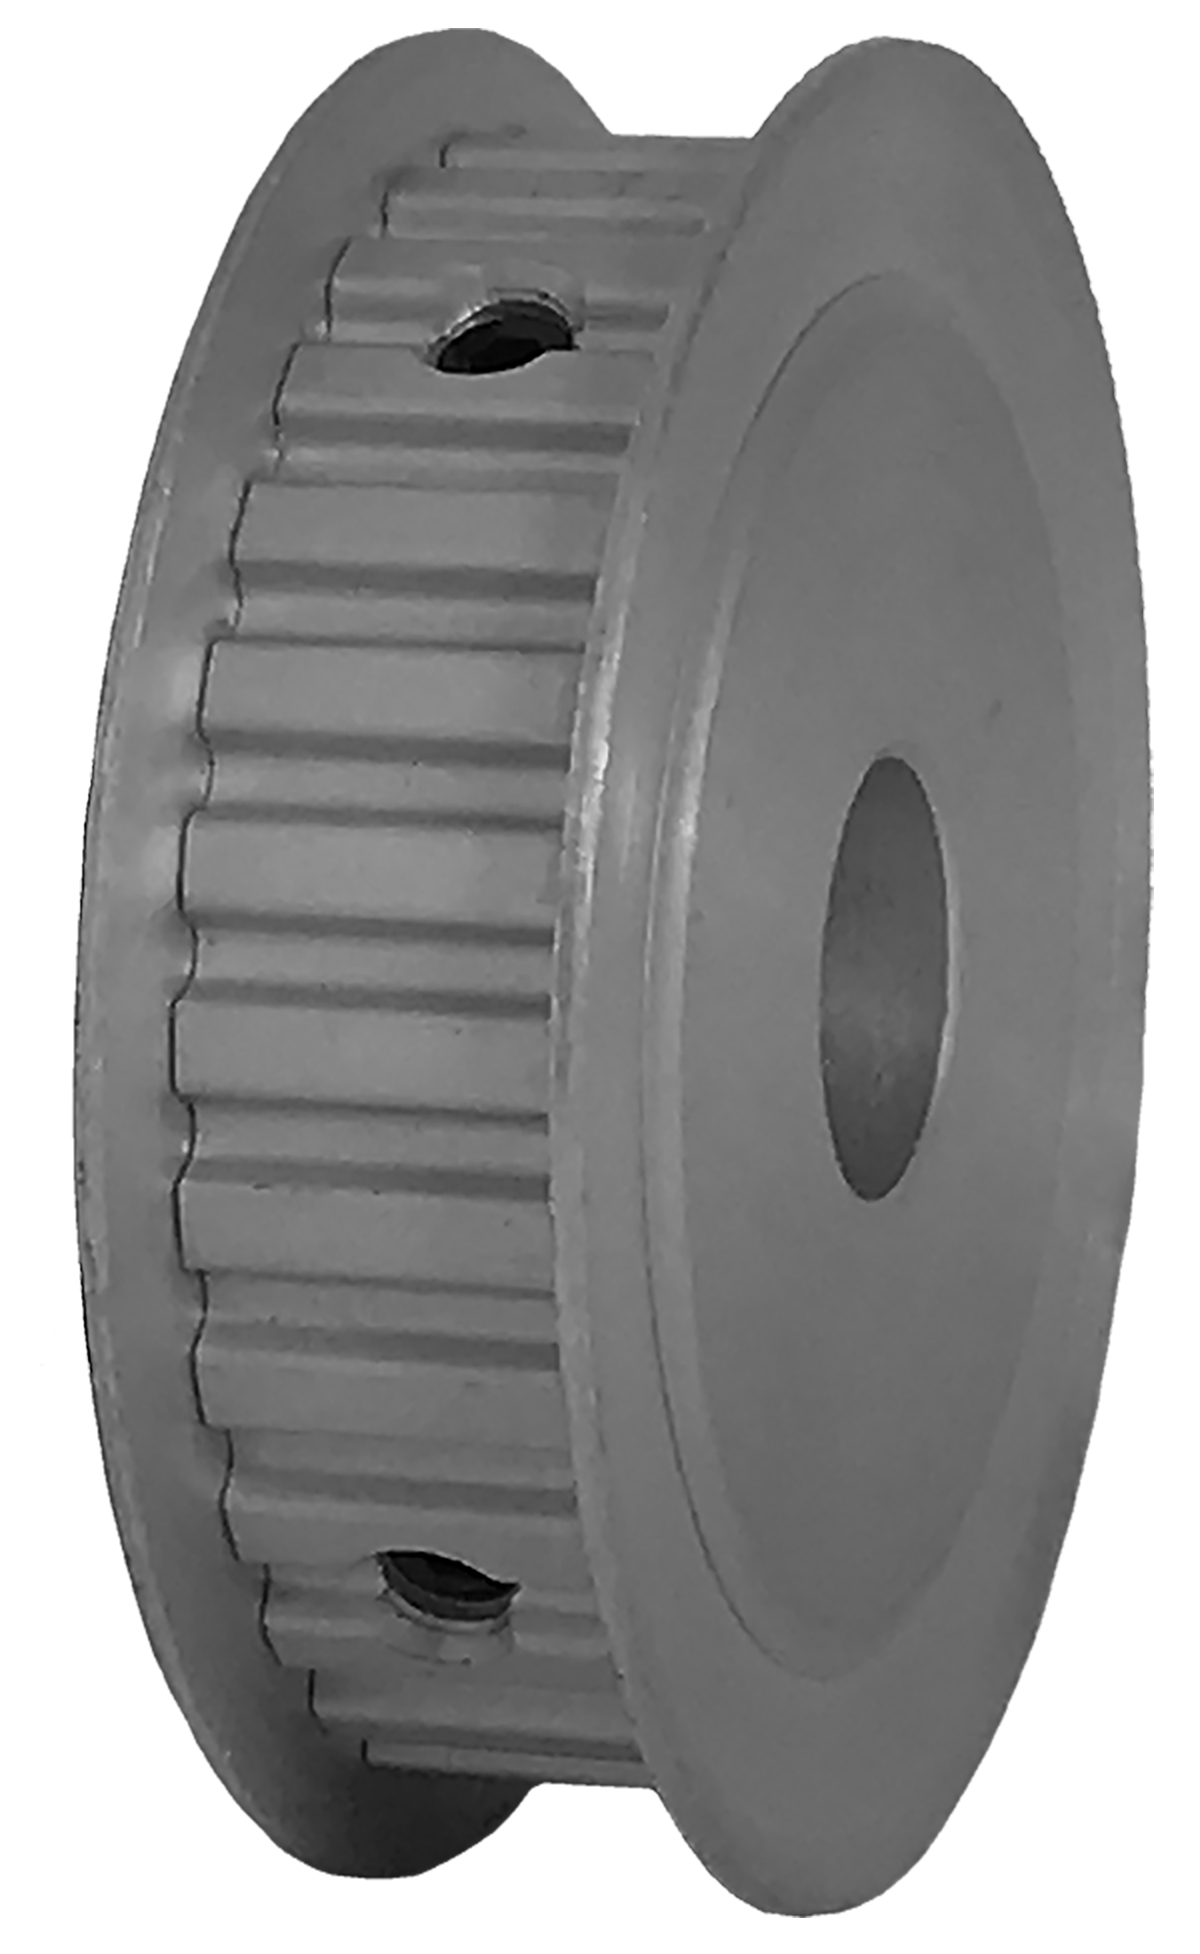 30XL037-3FA6 - Aluminum Imperial Pitch Pulleys